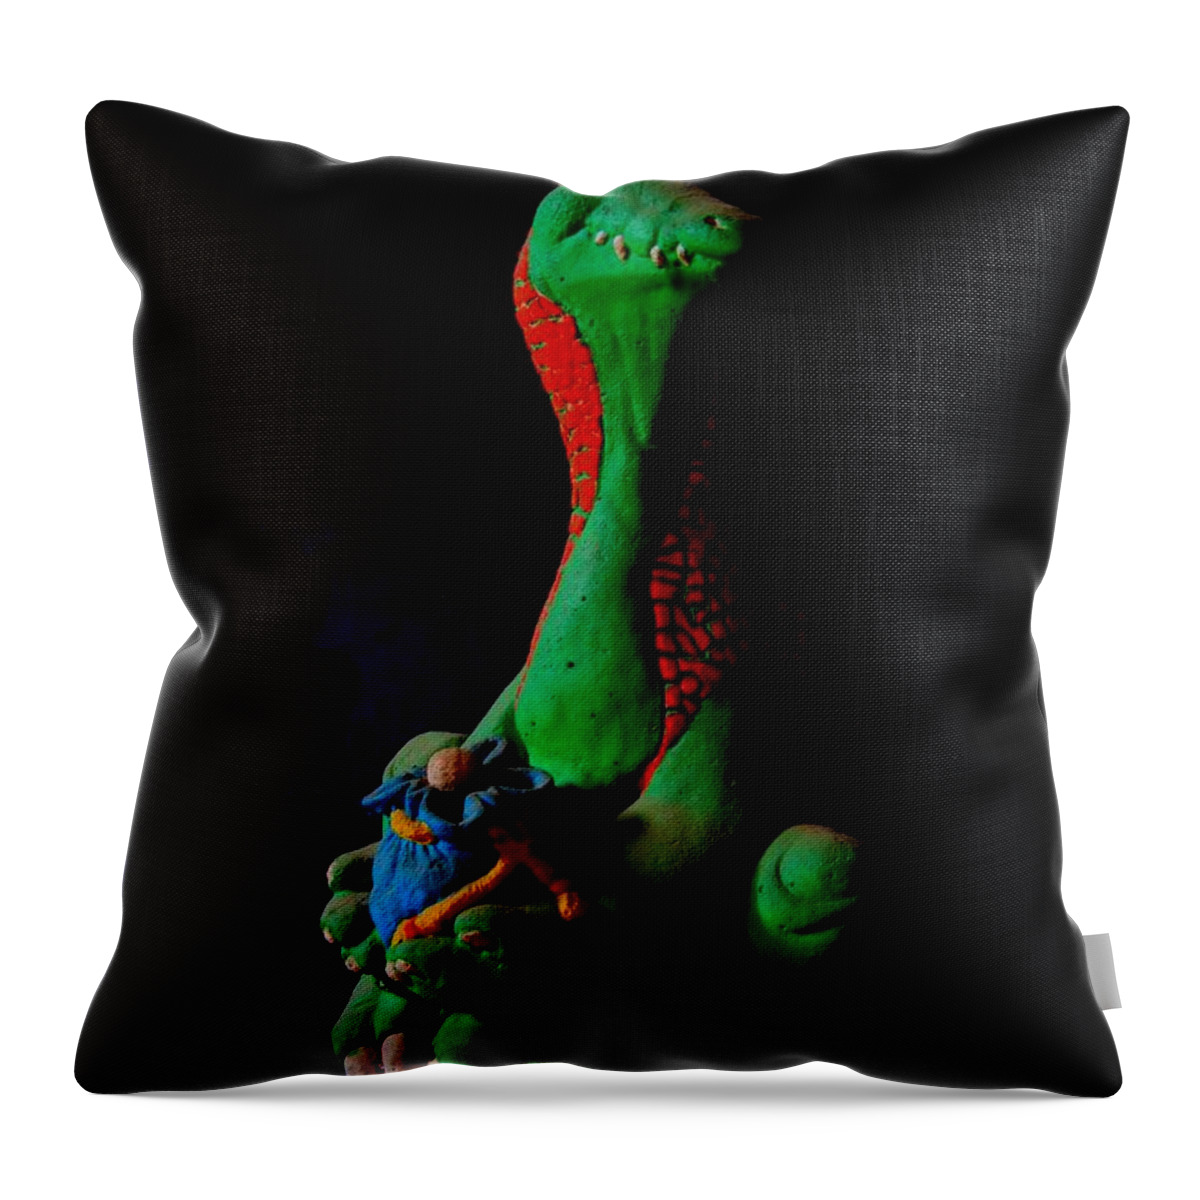 Murgatroyd Throw Pillow featuring the photograph Murgatroyd 4 by Mark Blauhoefer